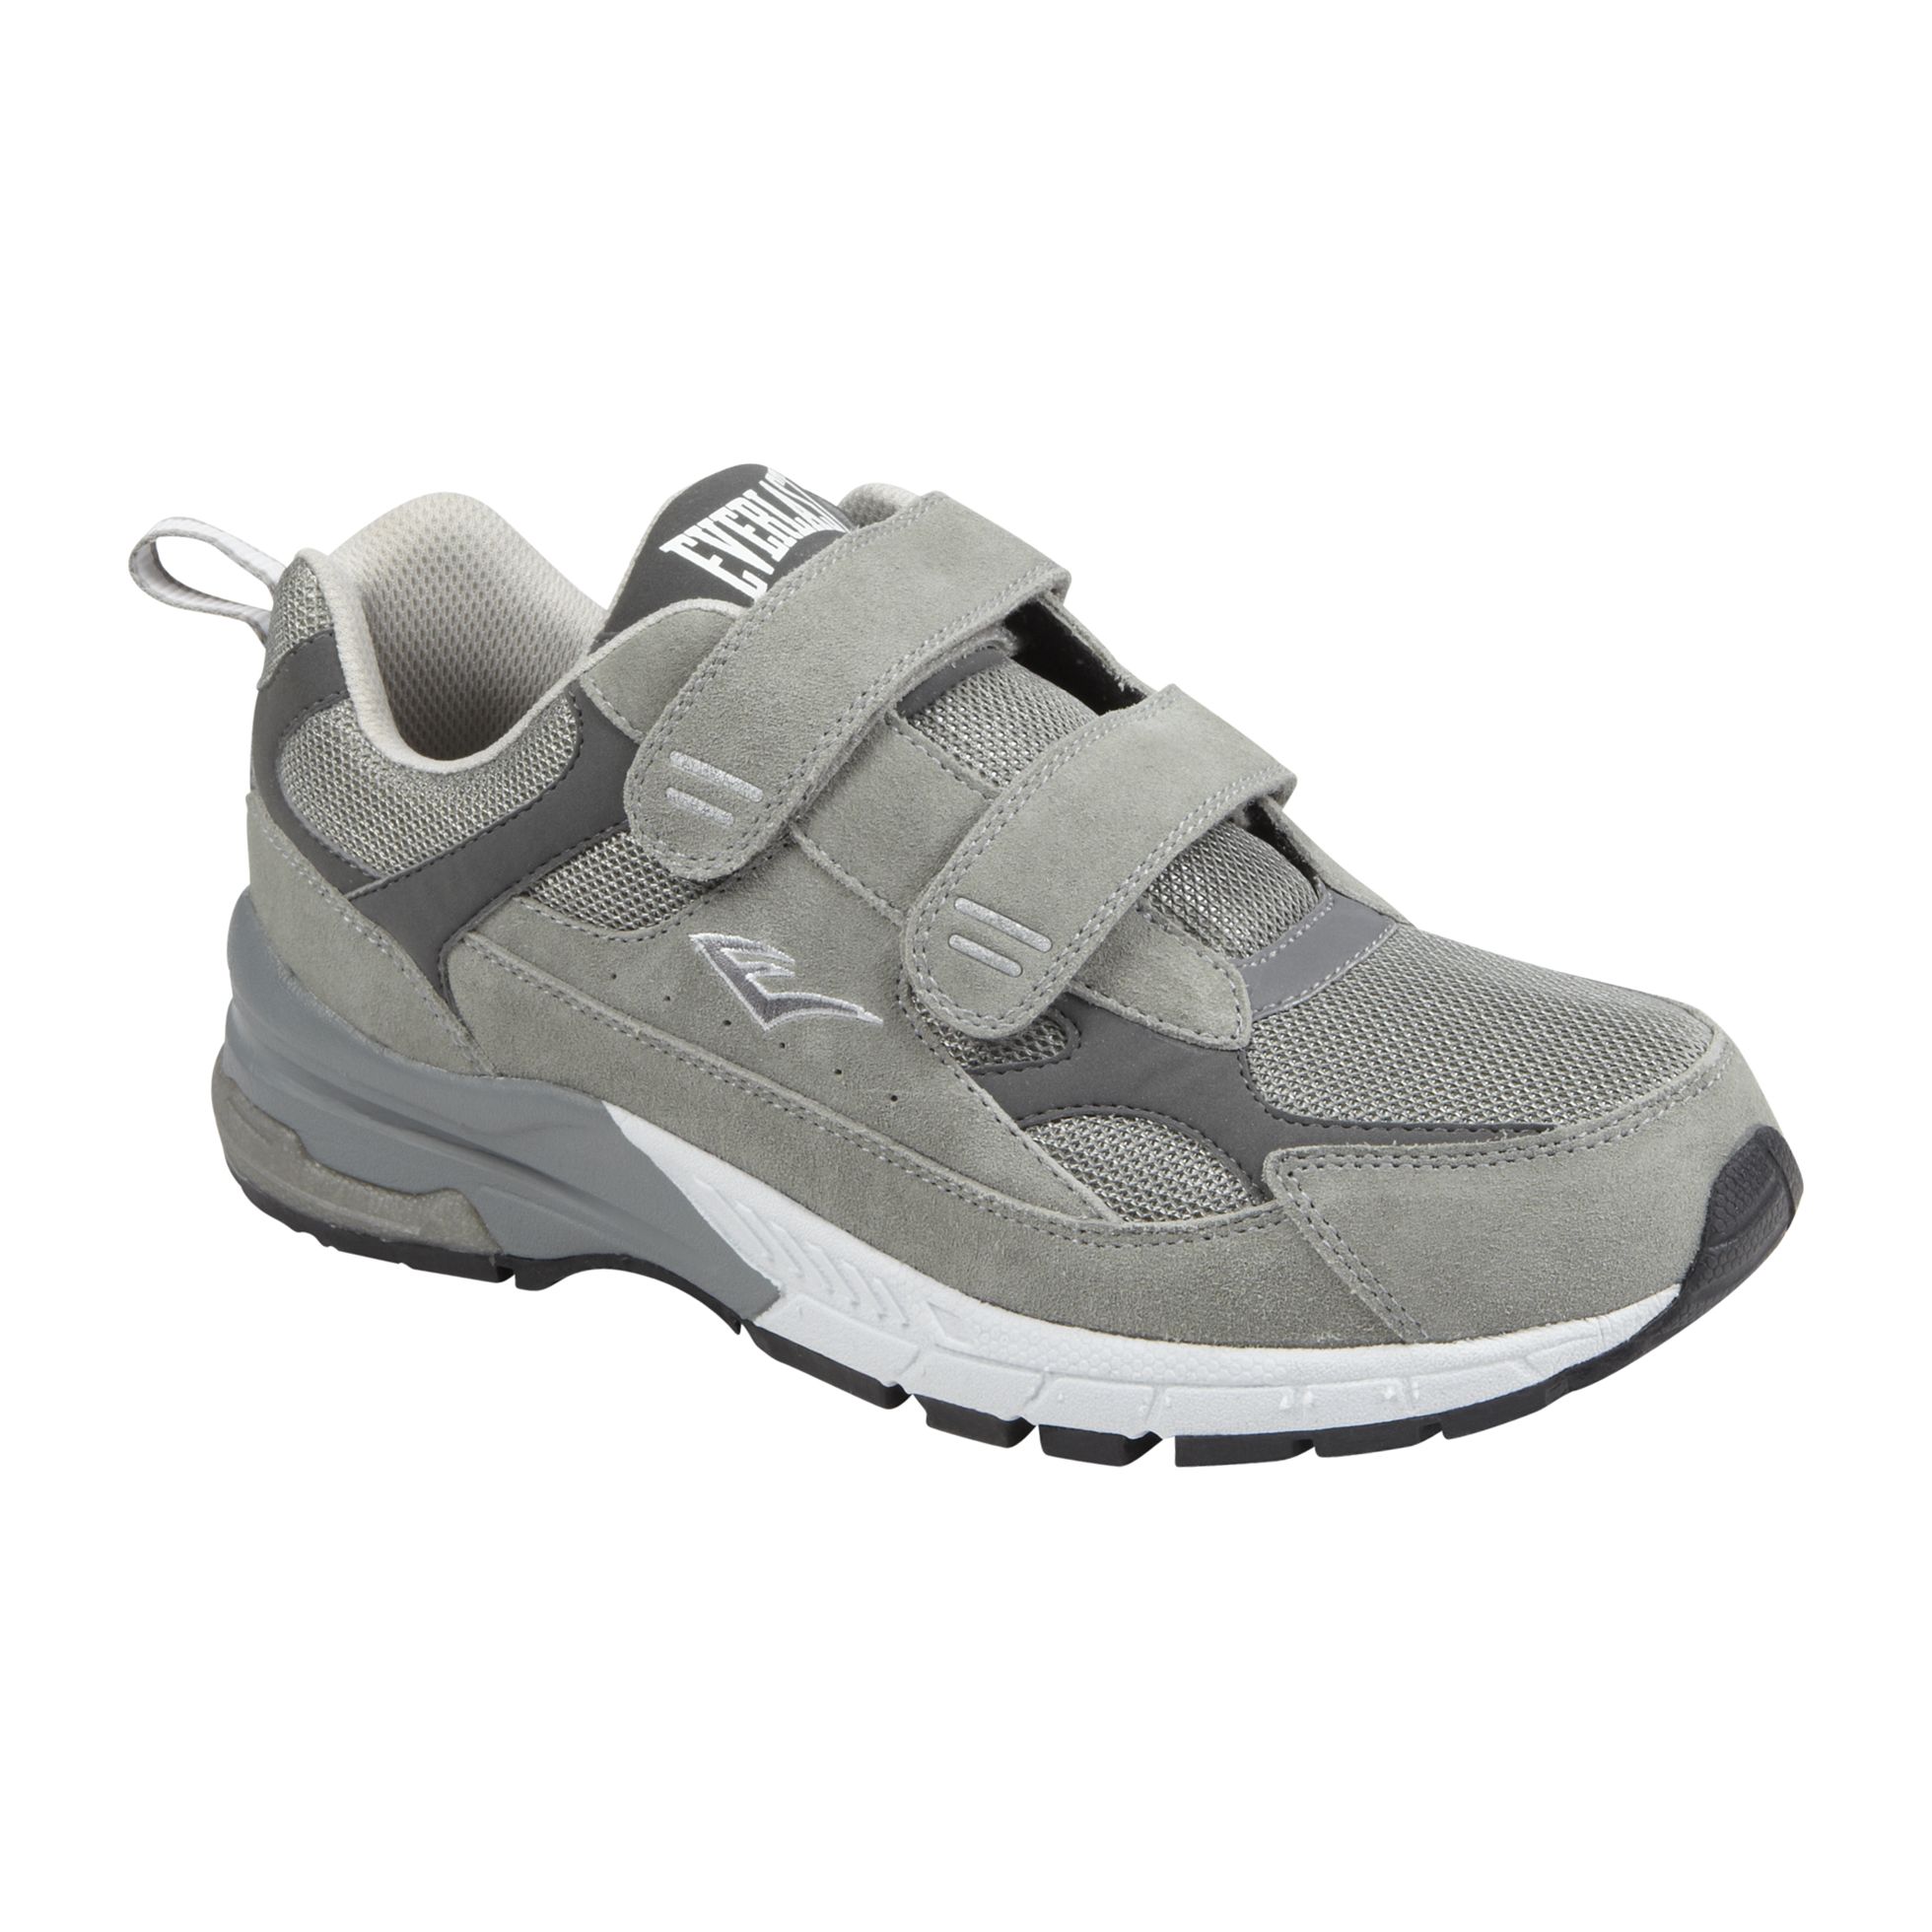 Men's Athletic Two-Strap Shoe Lincoln Wide Width - Gray